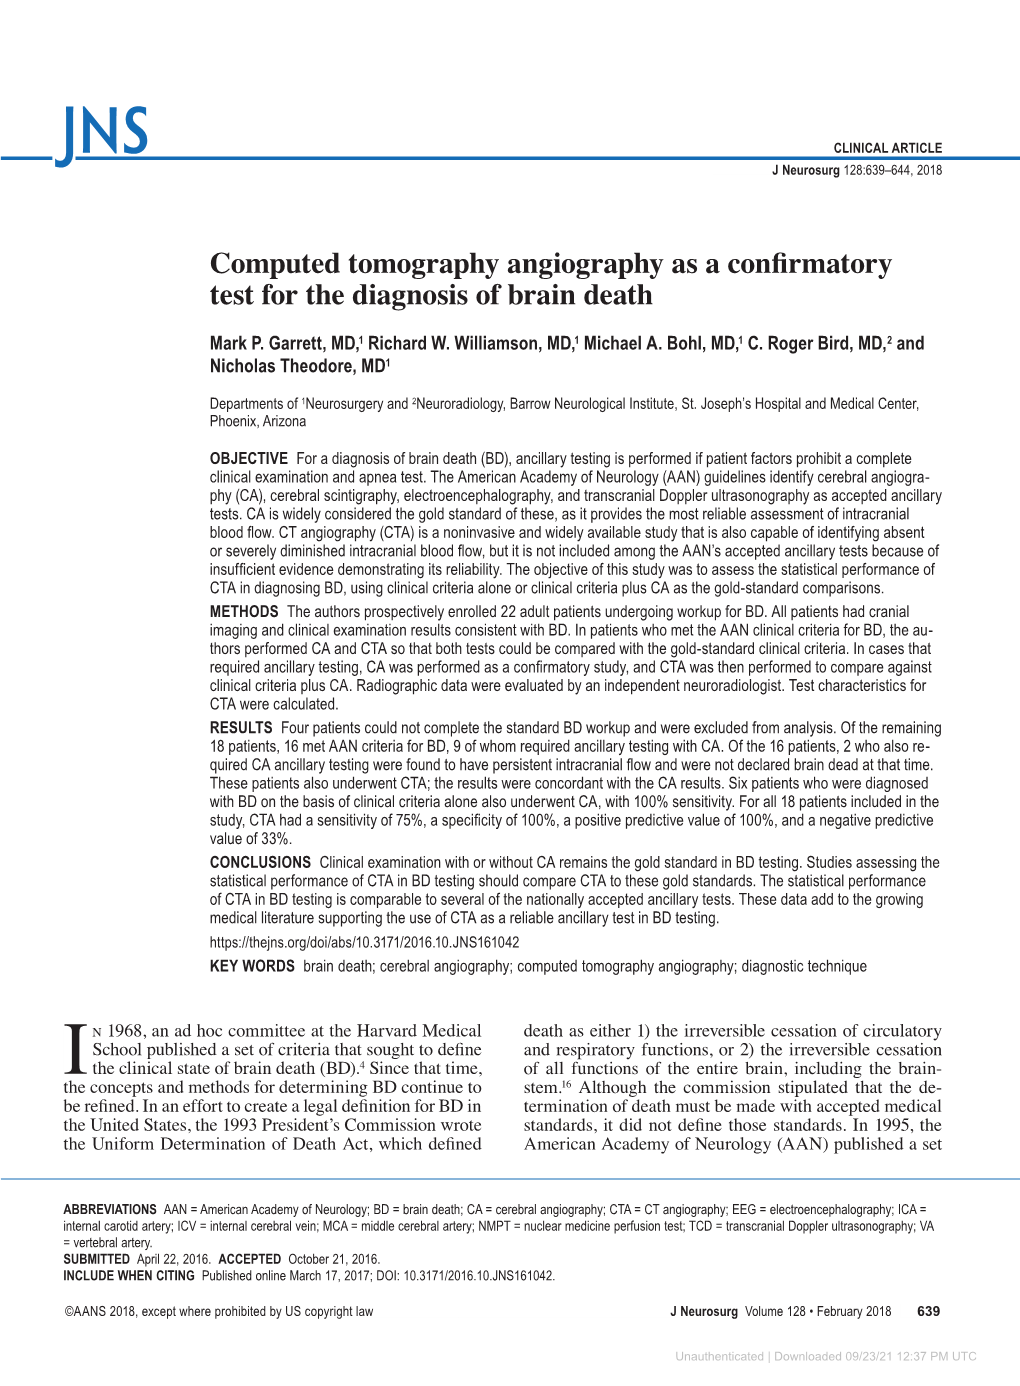 Computed Tomography Angiography As a Confirmatory Test for the Diagnosis of Brain Death